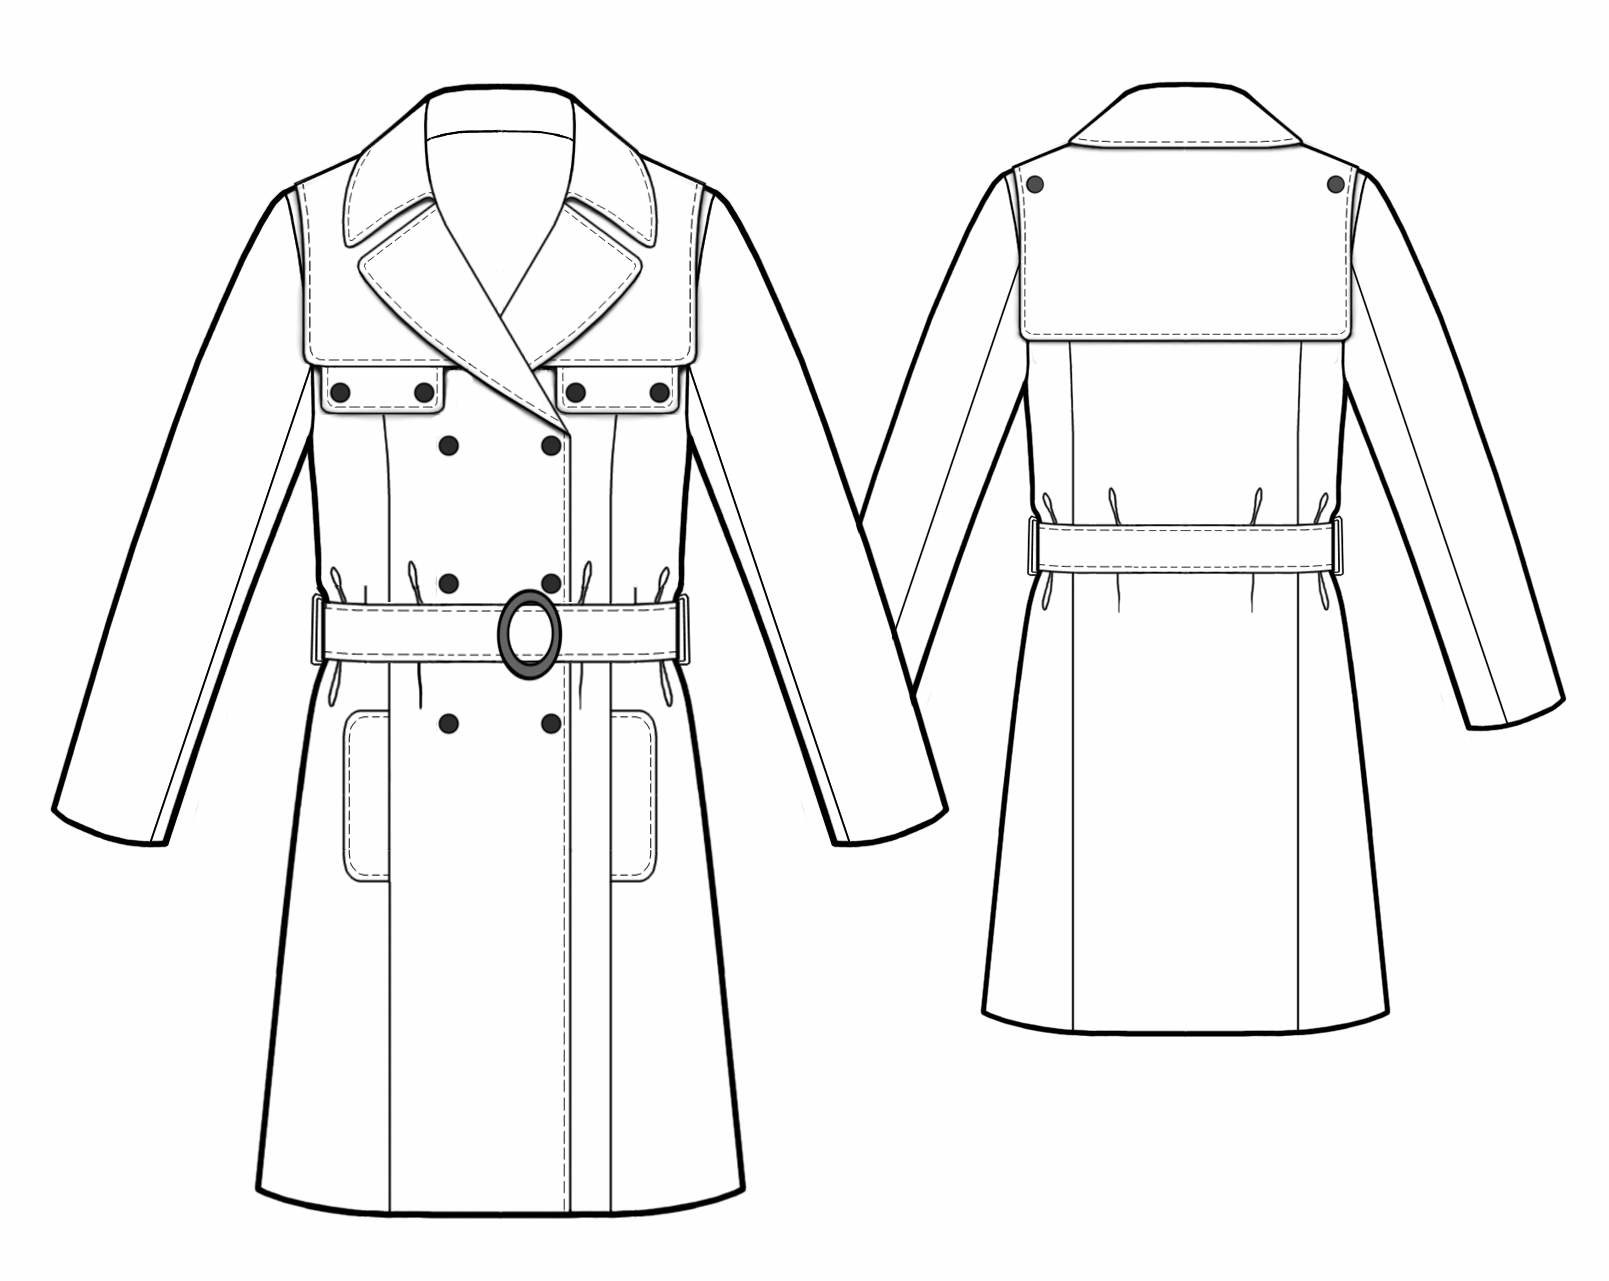 Trench Coat Sewing Pattern Trench Coat Sewing Pattern 5488 Made To Measure Sewing Pattern